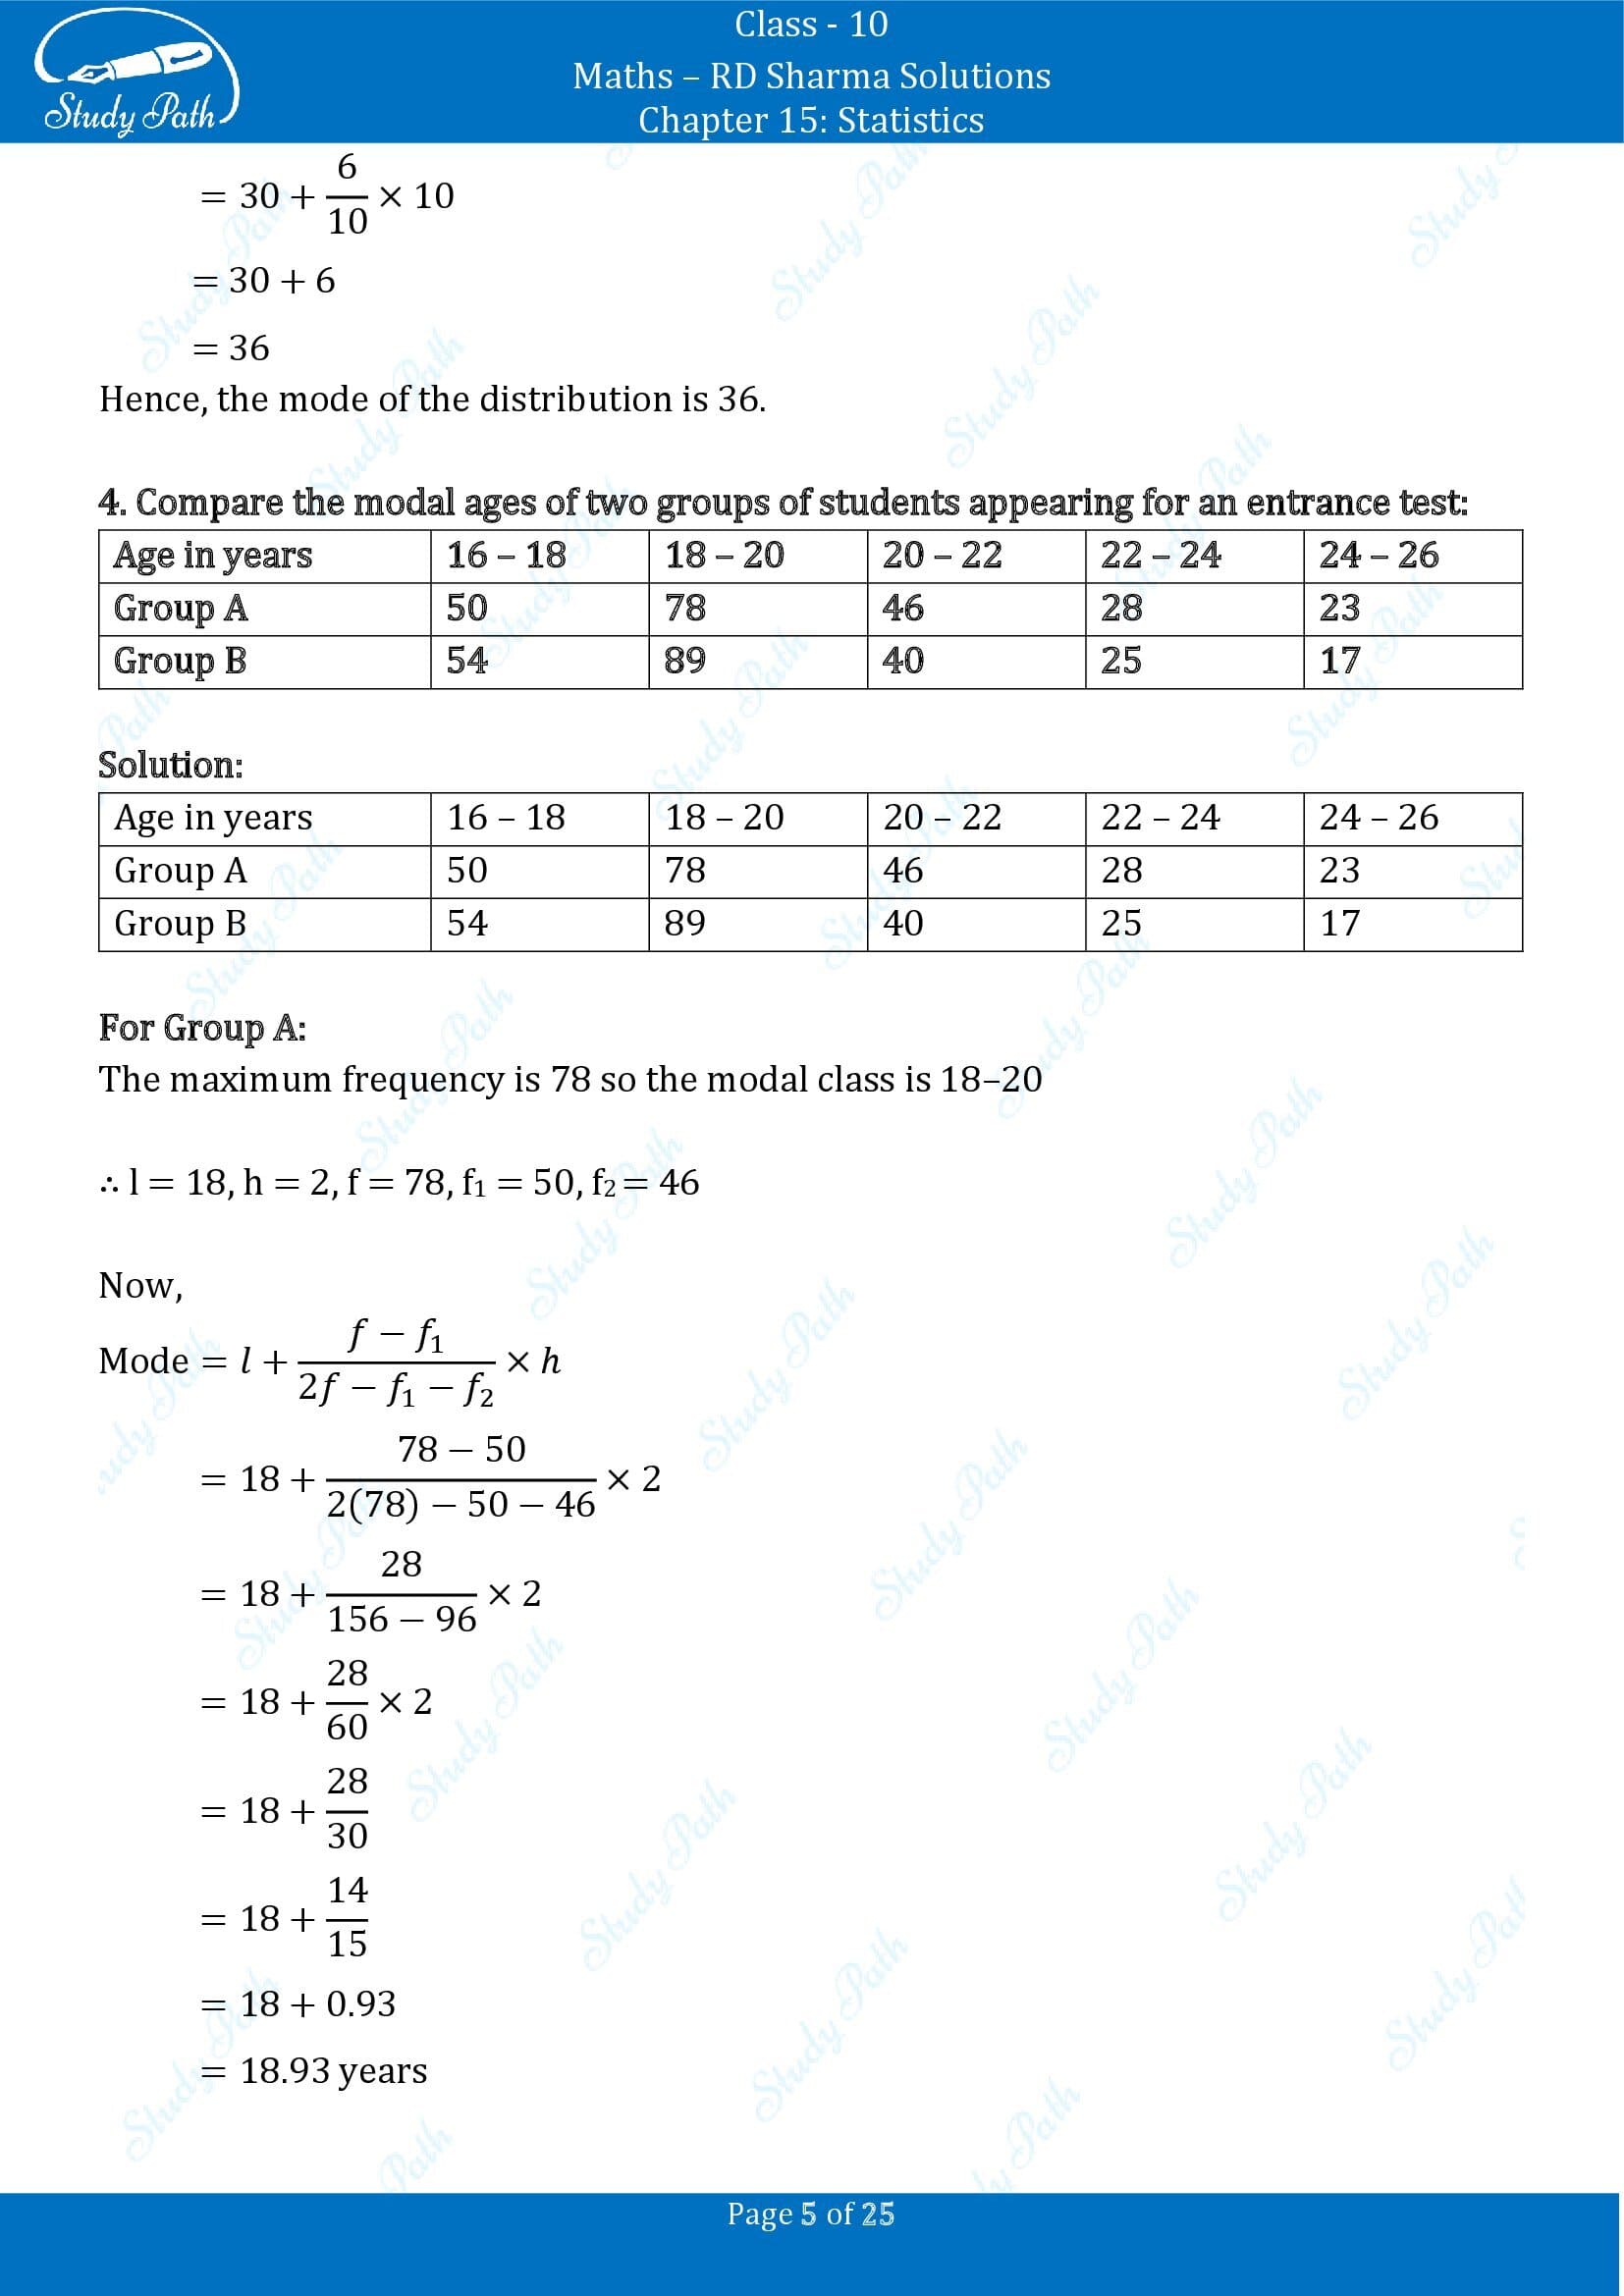 RD Sharma Solutions Class 10 Chapter 15 Statistics Exercise 15.5 00005